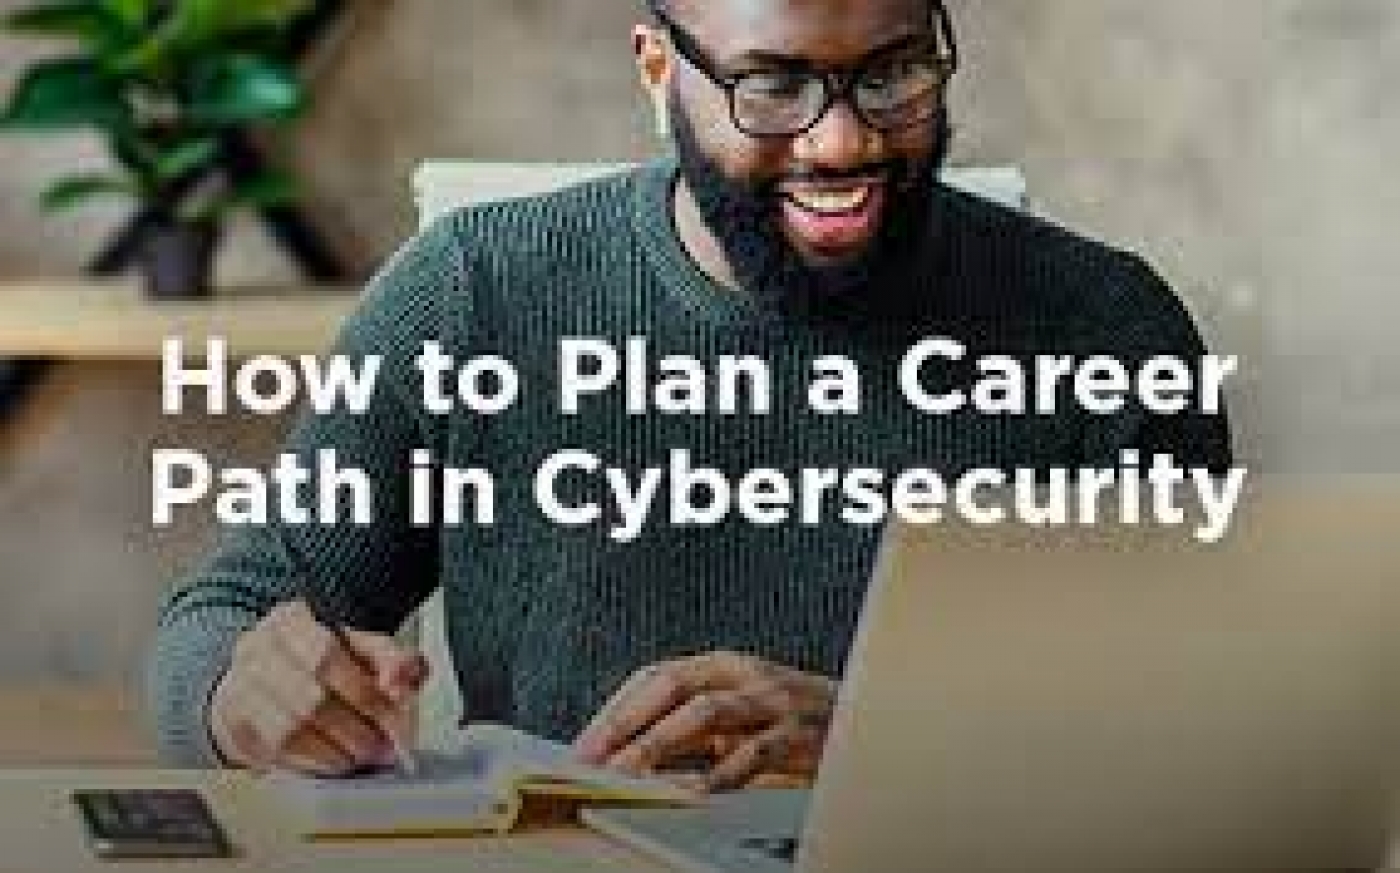 How to Plan a Career Path in Cybersecurity